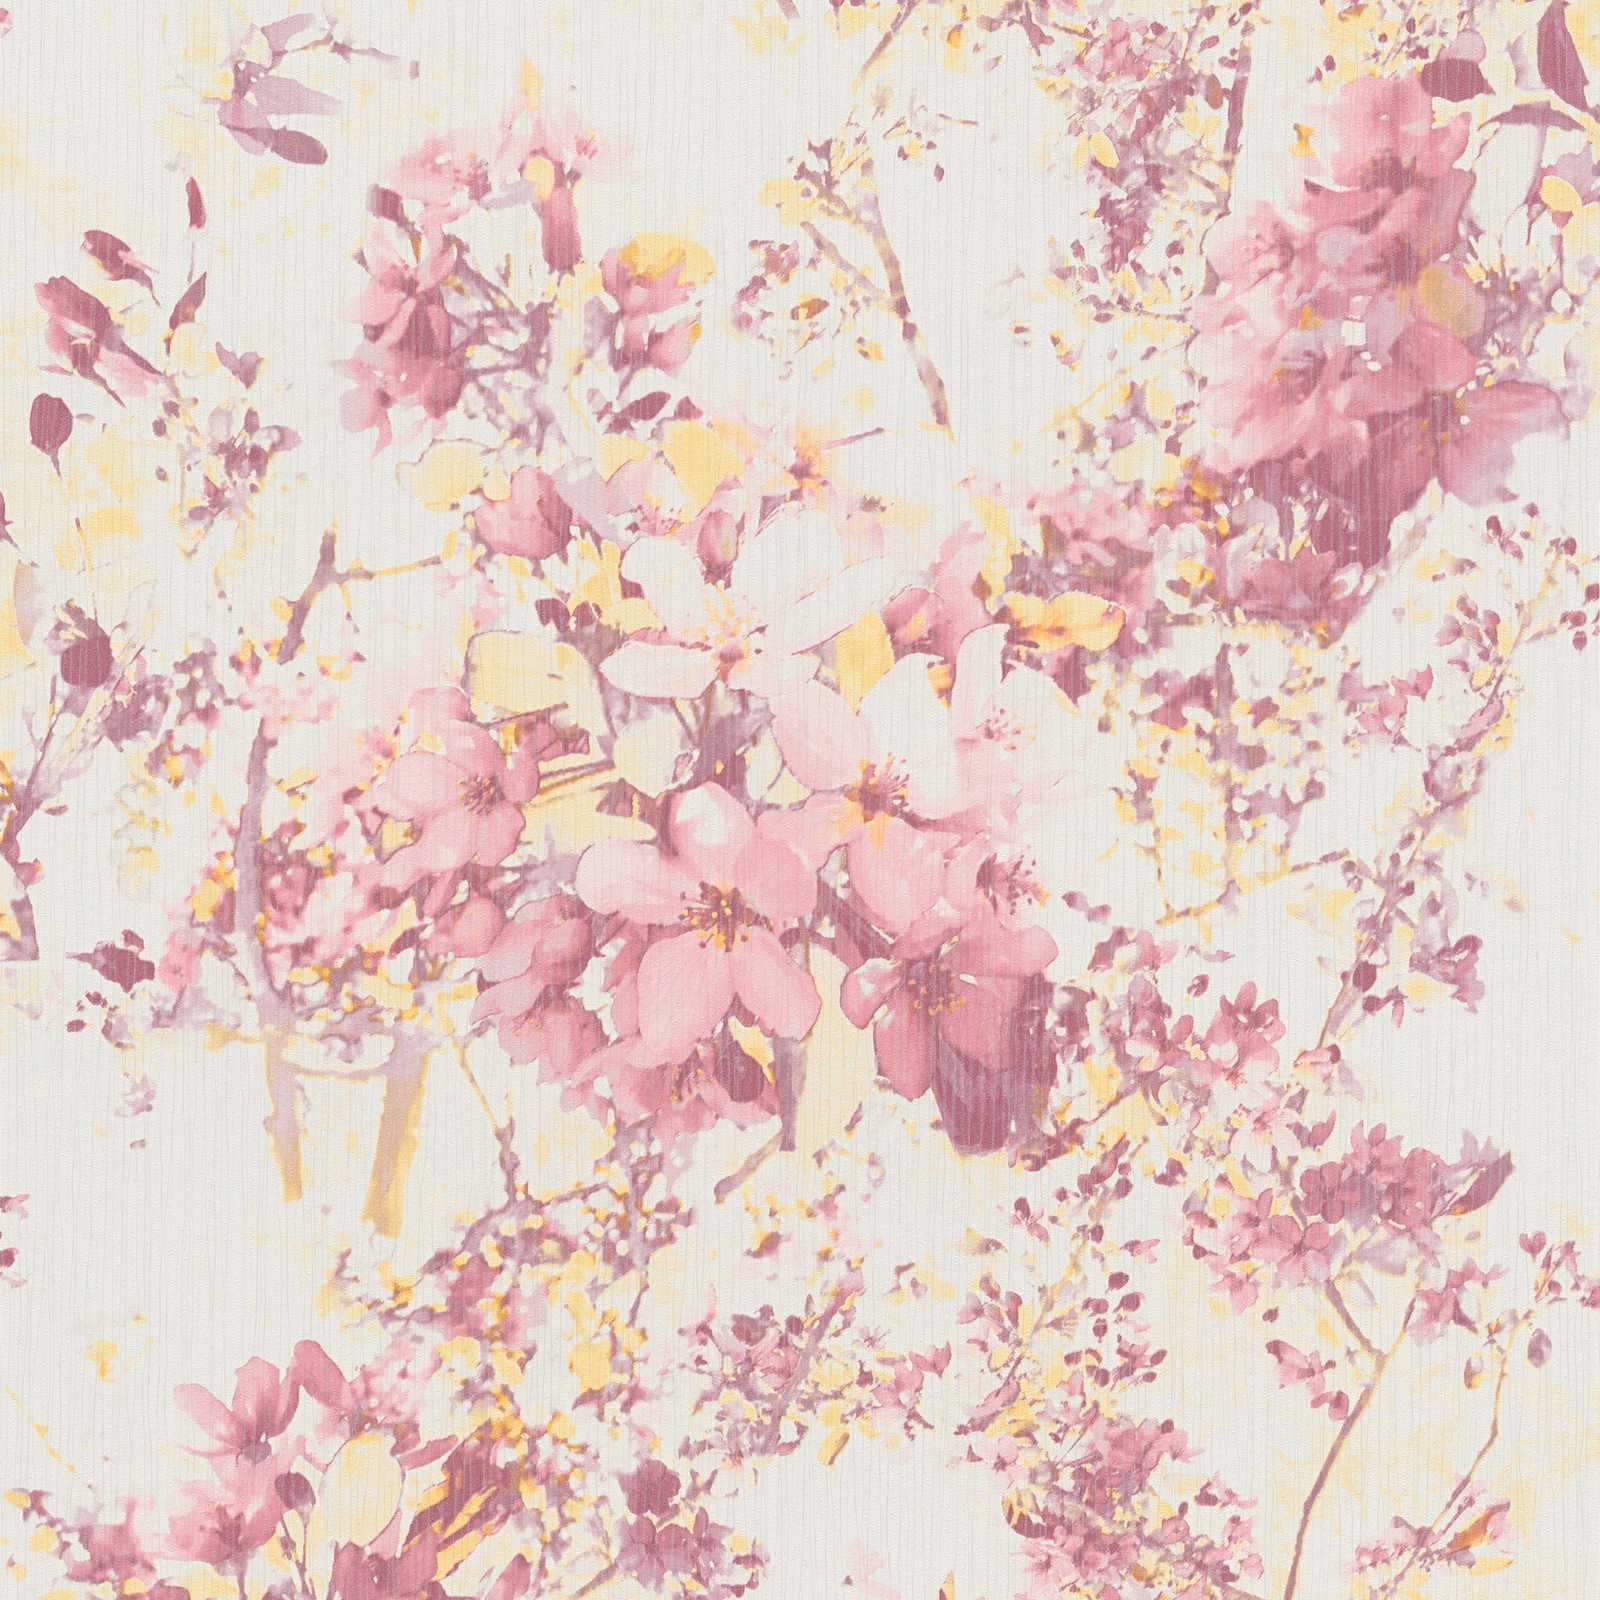         Flowers non-woven wallpaper with floral motif - pink, yellow
    